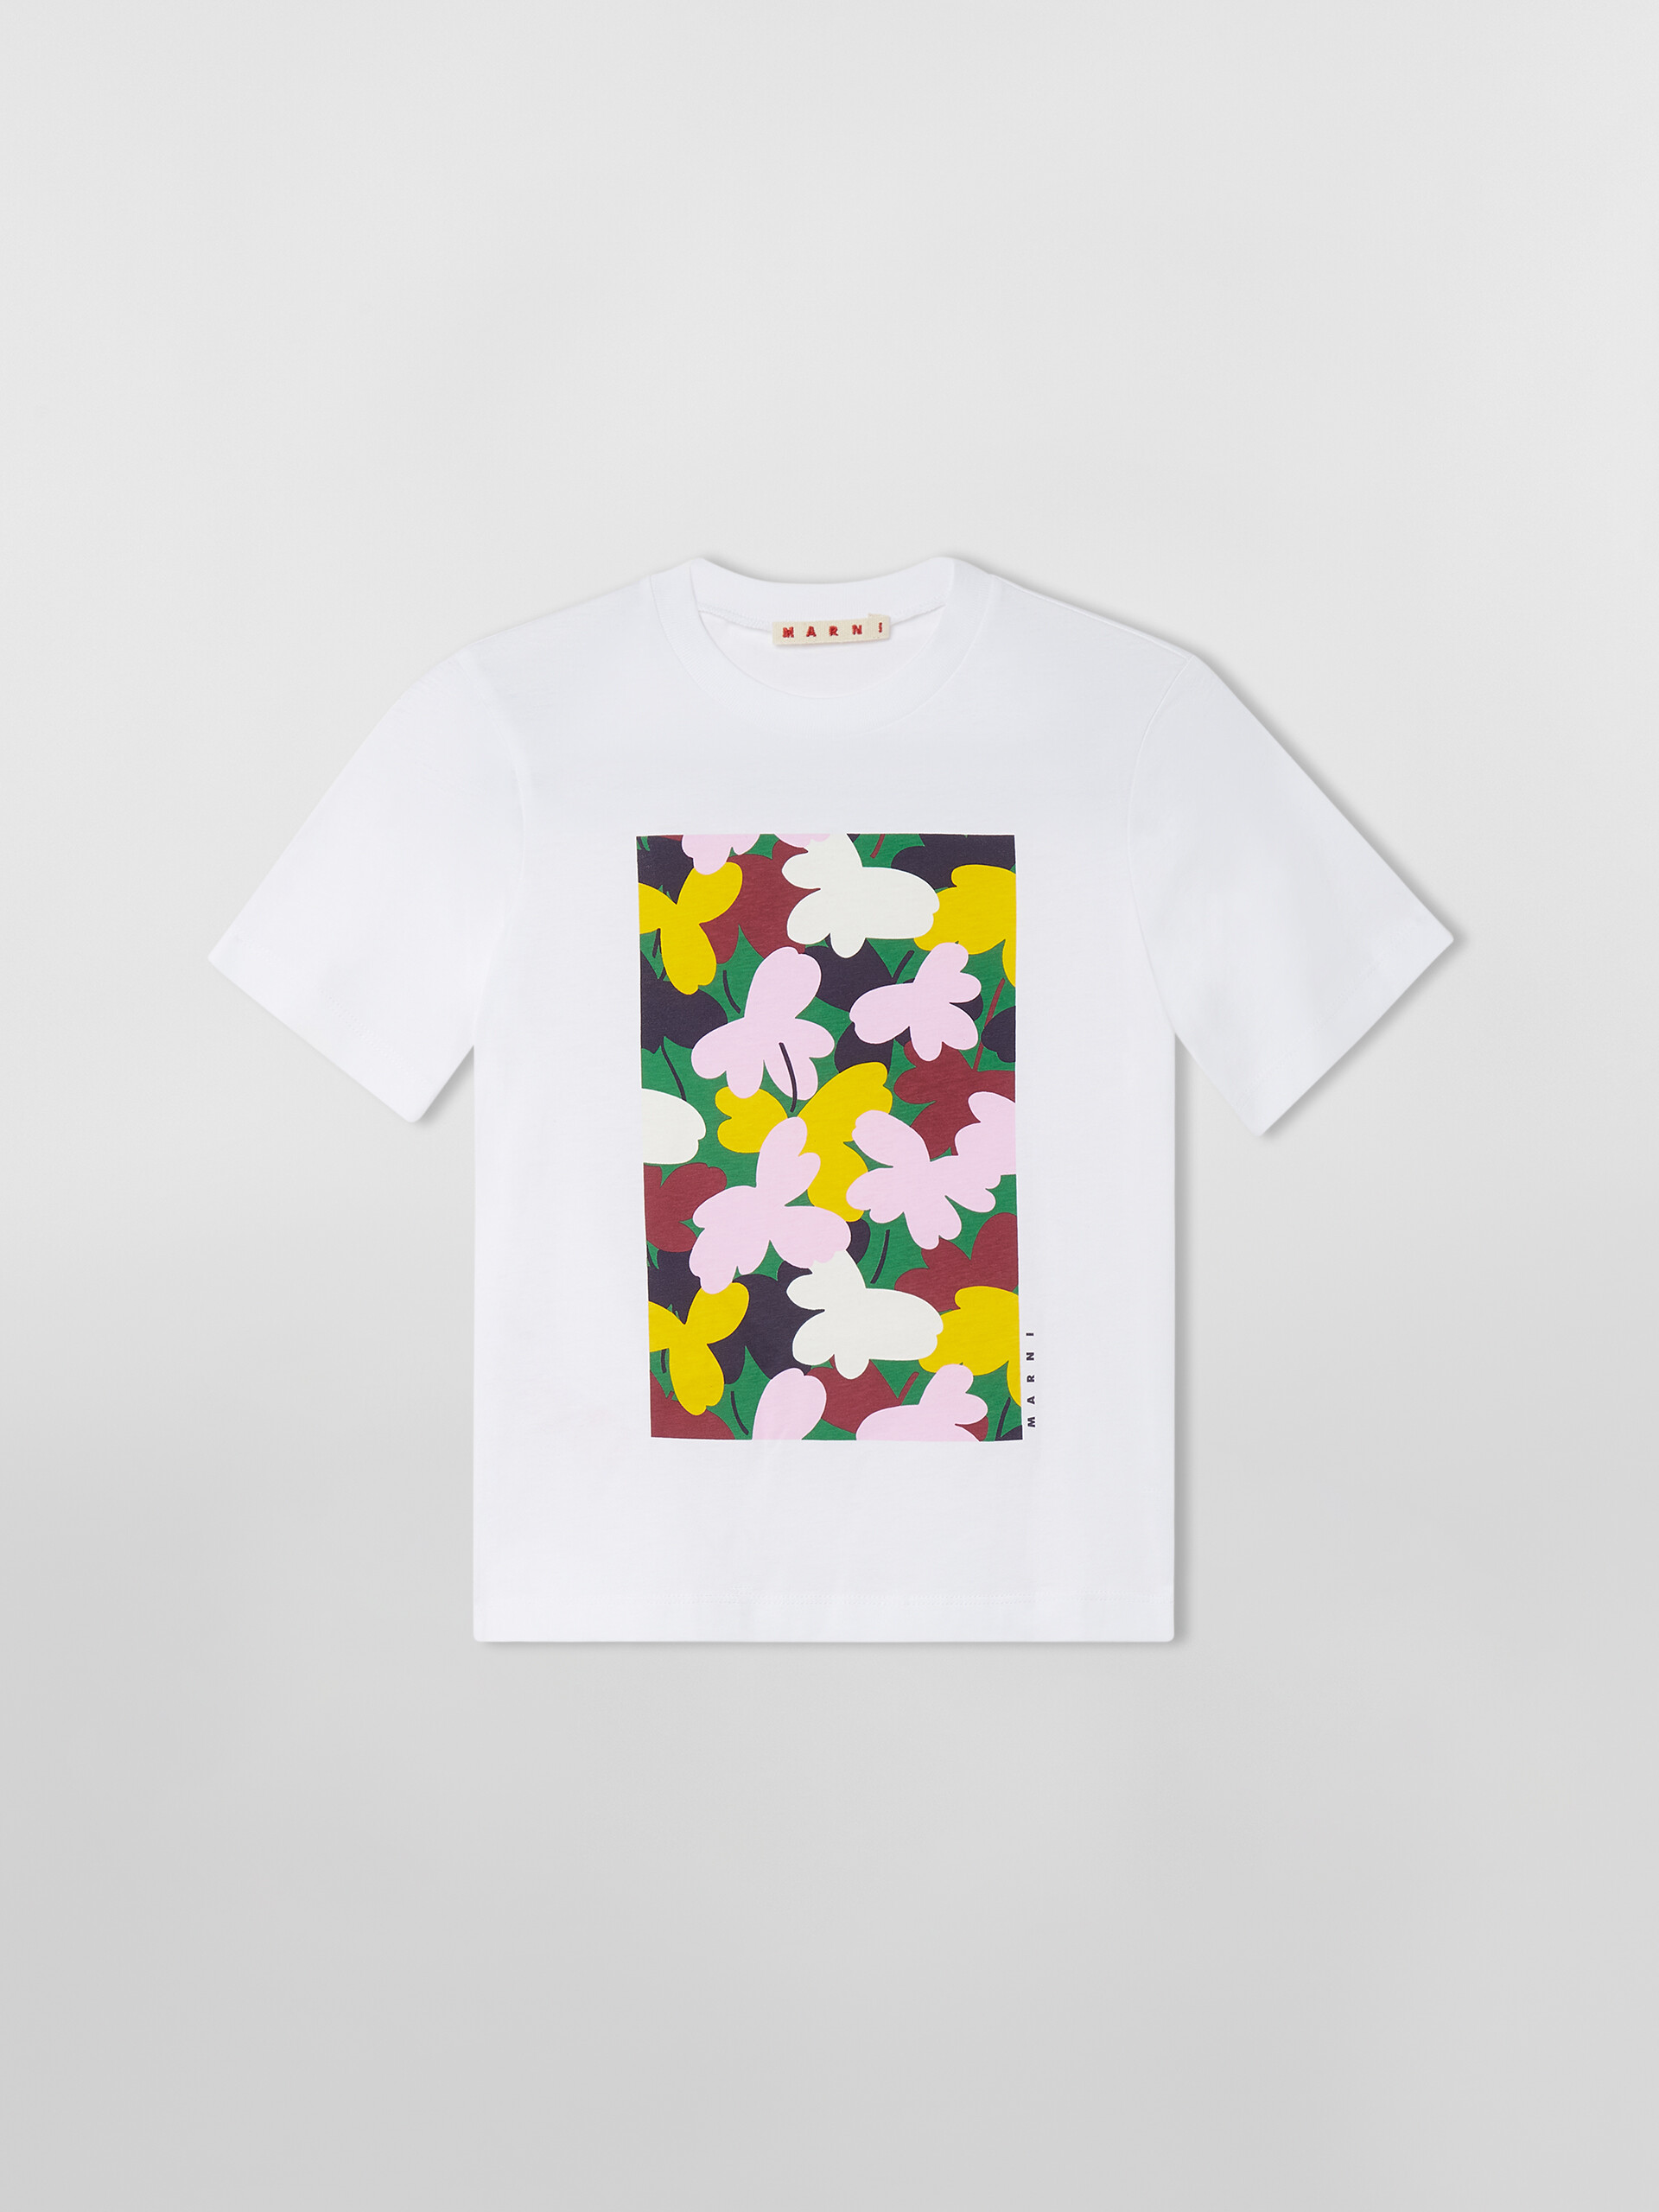 T-SHIRT WITH FLOWERS PRINT - T-shirts - Image 1